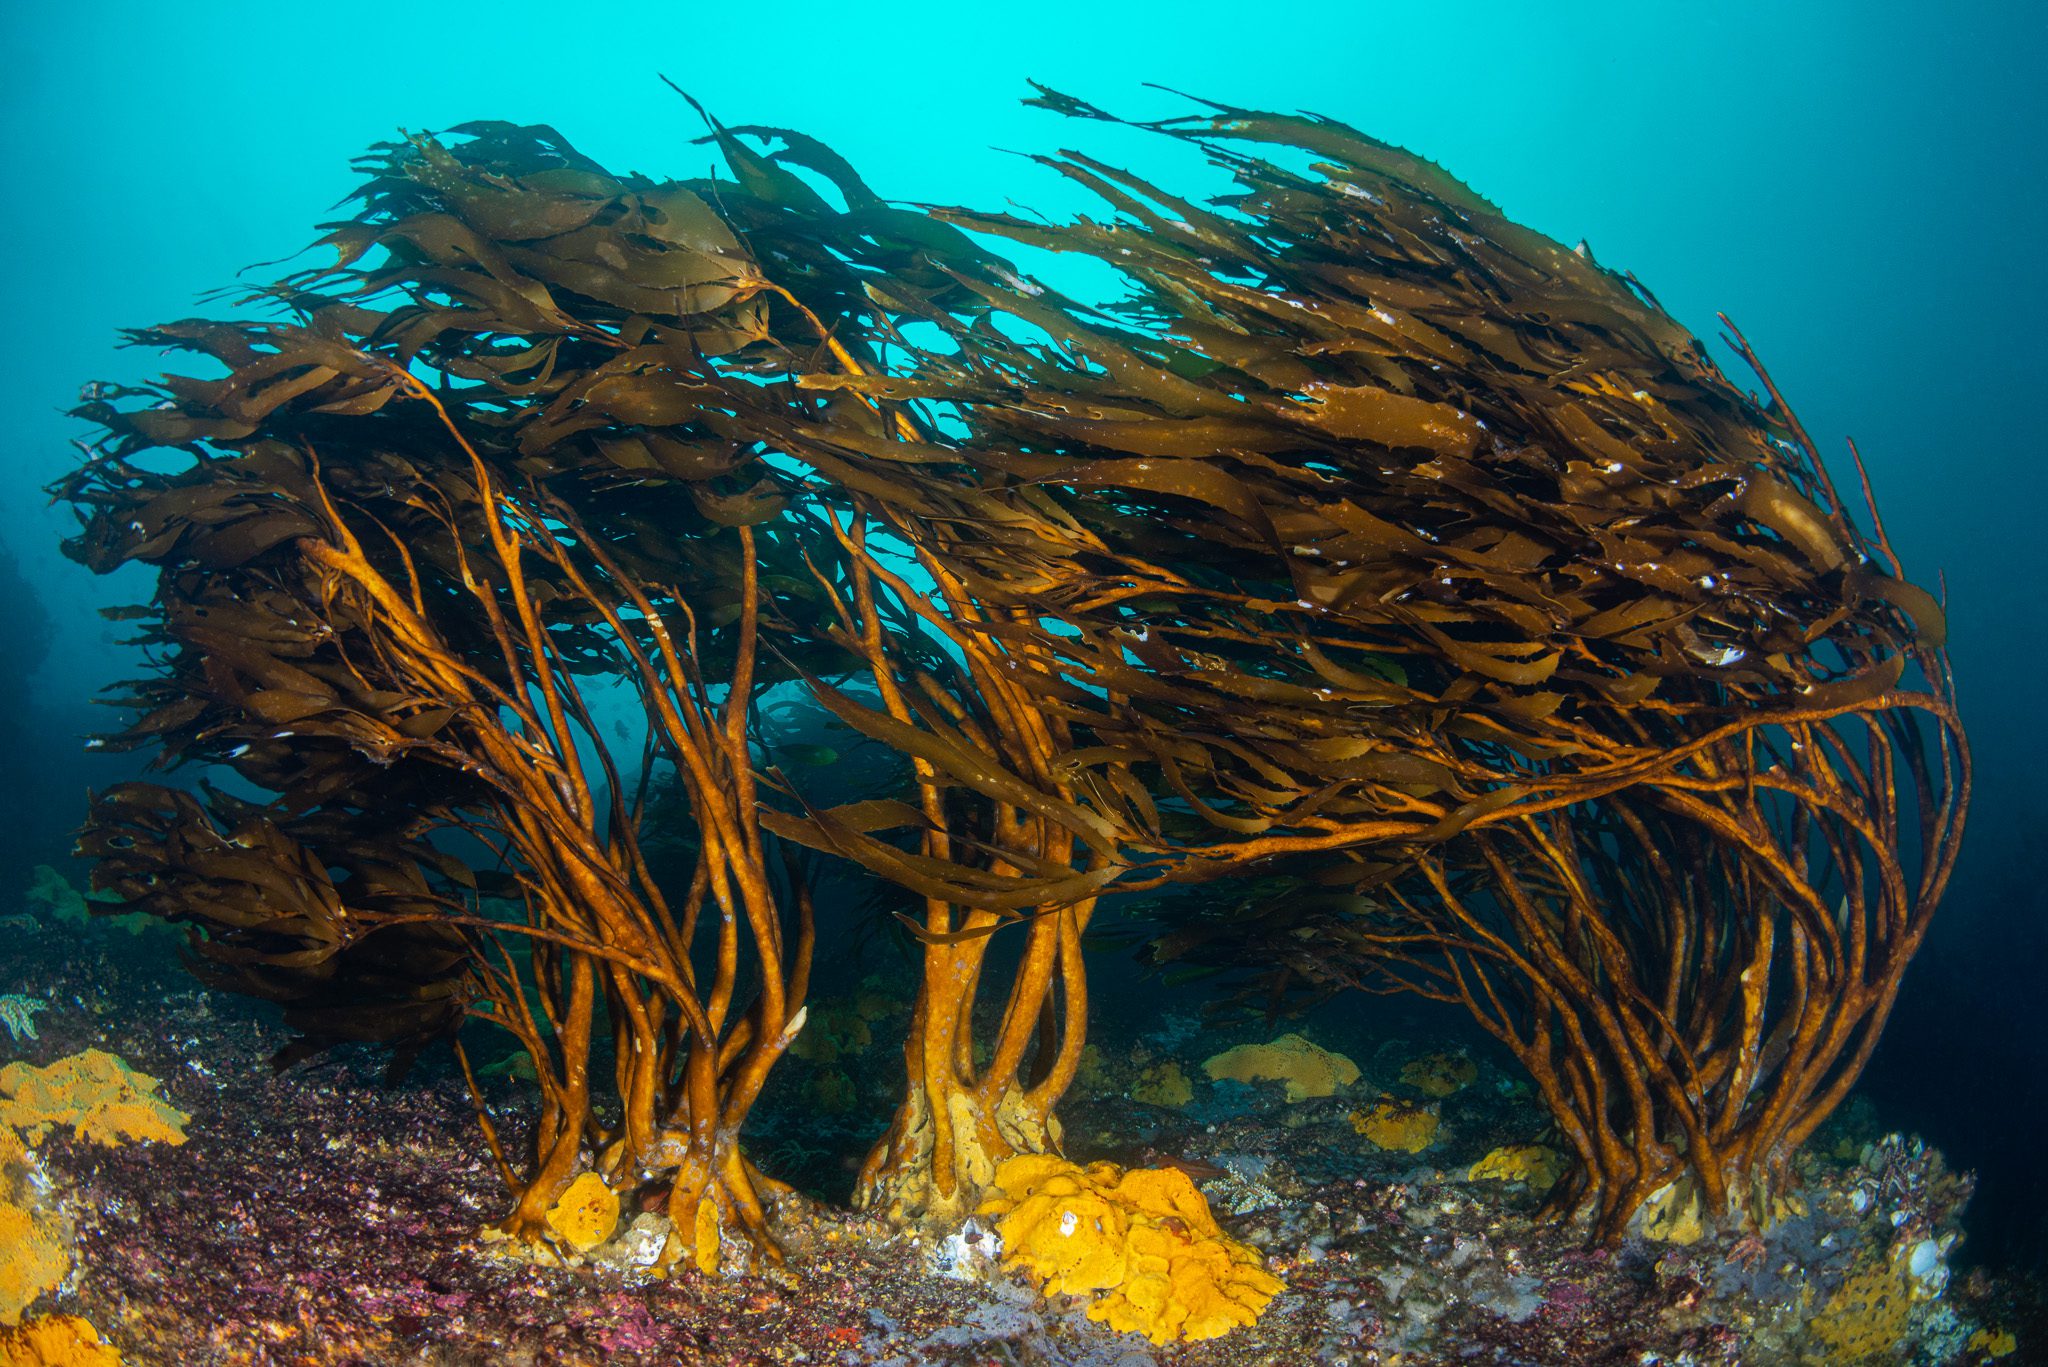 A kelp forest in the Humboldt Archipelago, Chile.